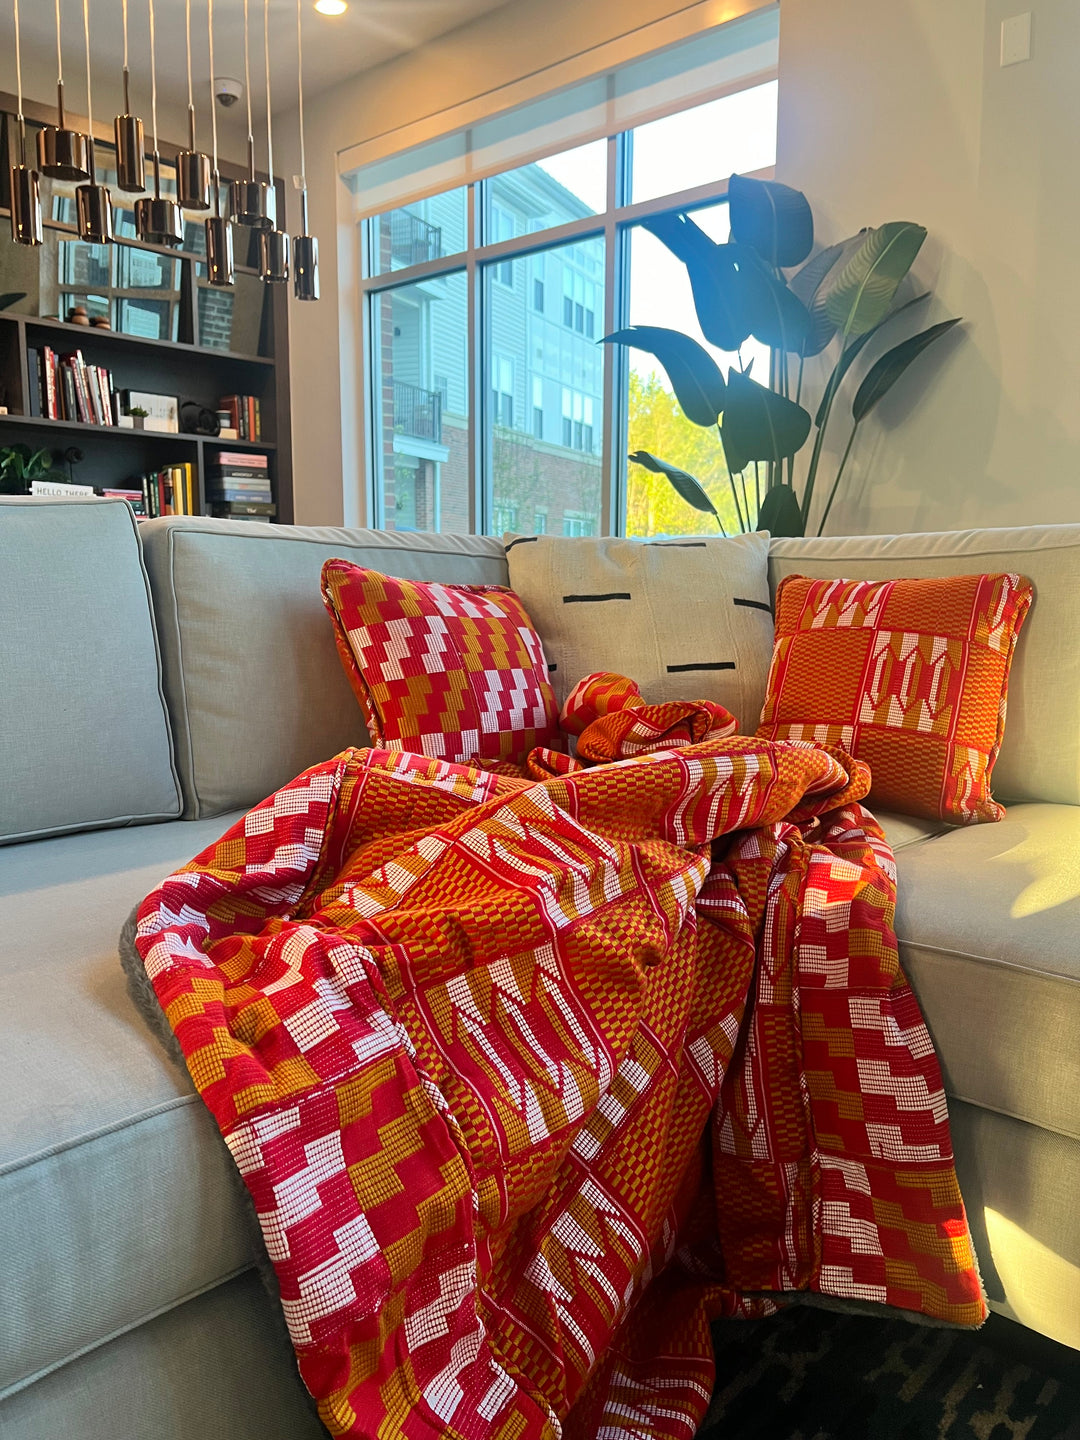 blankets showcase vibrant and bold Kente patterns that are deeply rooted in Ghanaian culture. The intricate geometric designs, with their vibrant colors and symbolic motifs, tell stories of history, wisdom, and cultural significance.